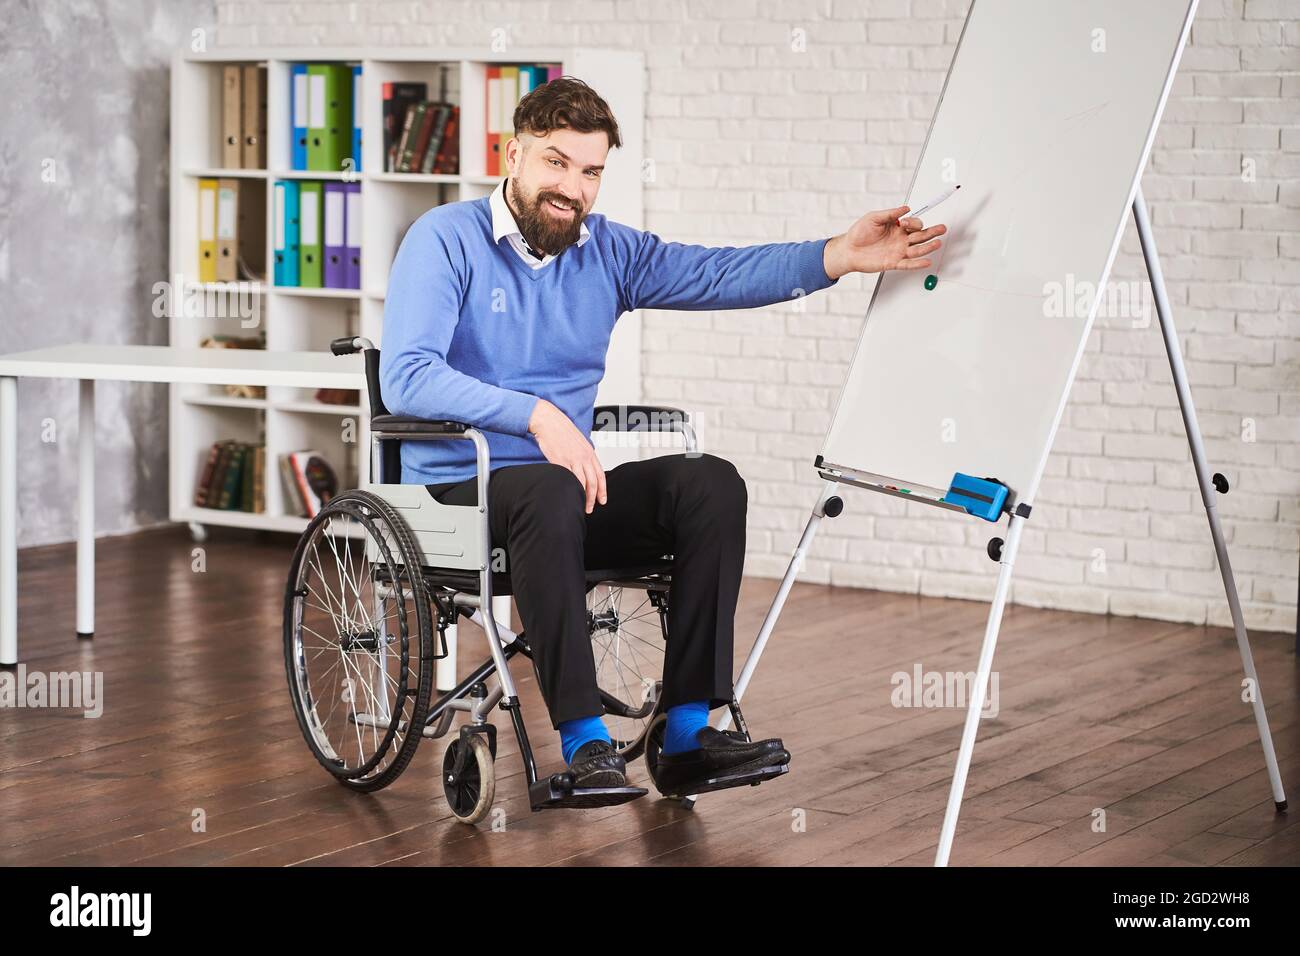 Disabled team leader using a board to draw chart and explaining Stock Photo